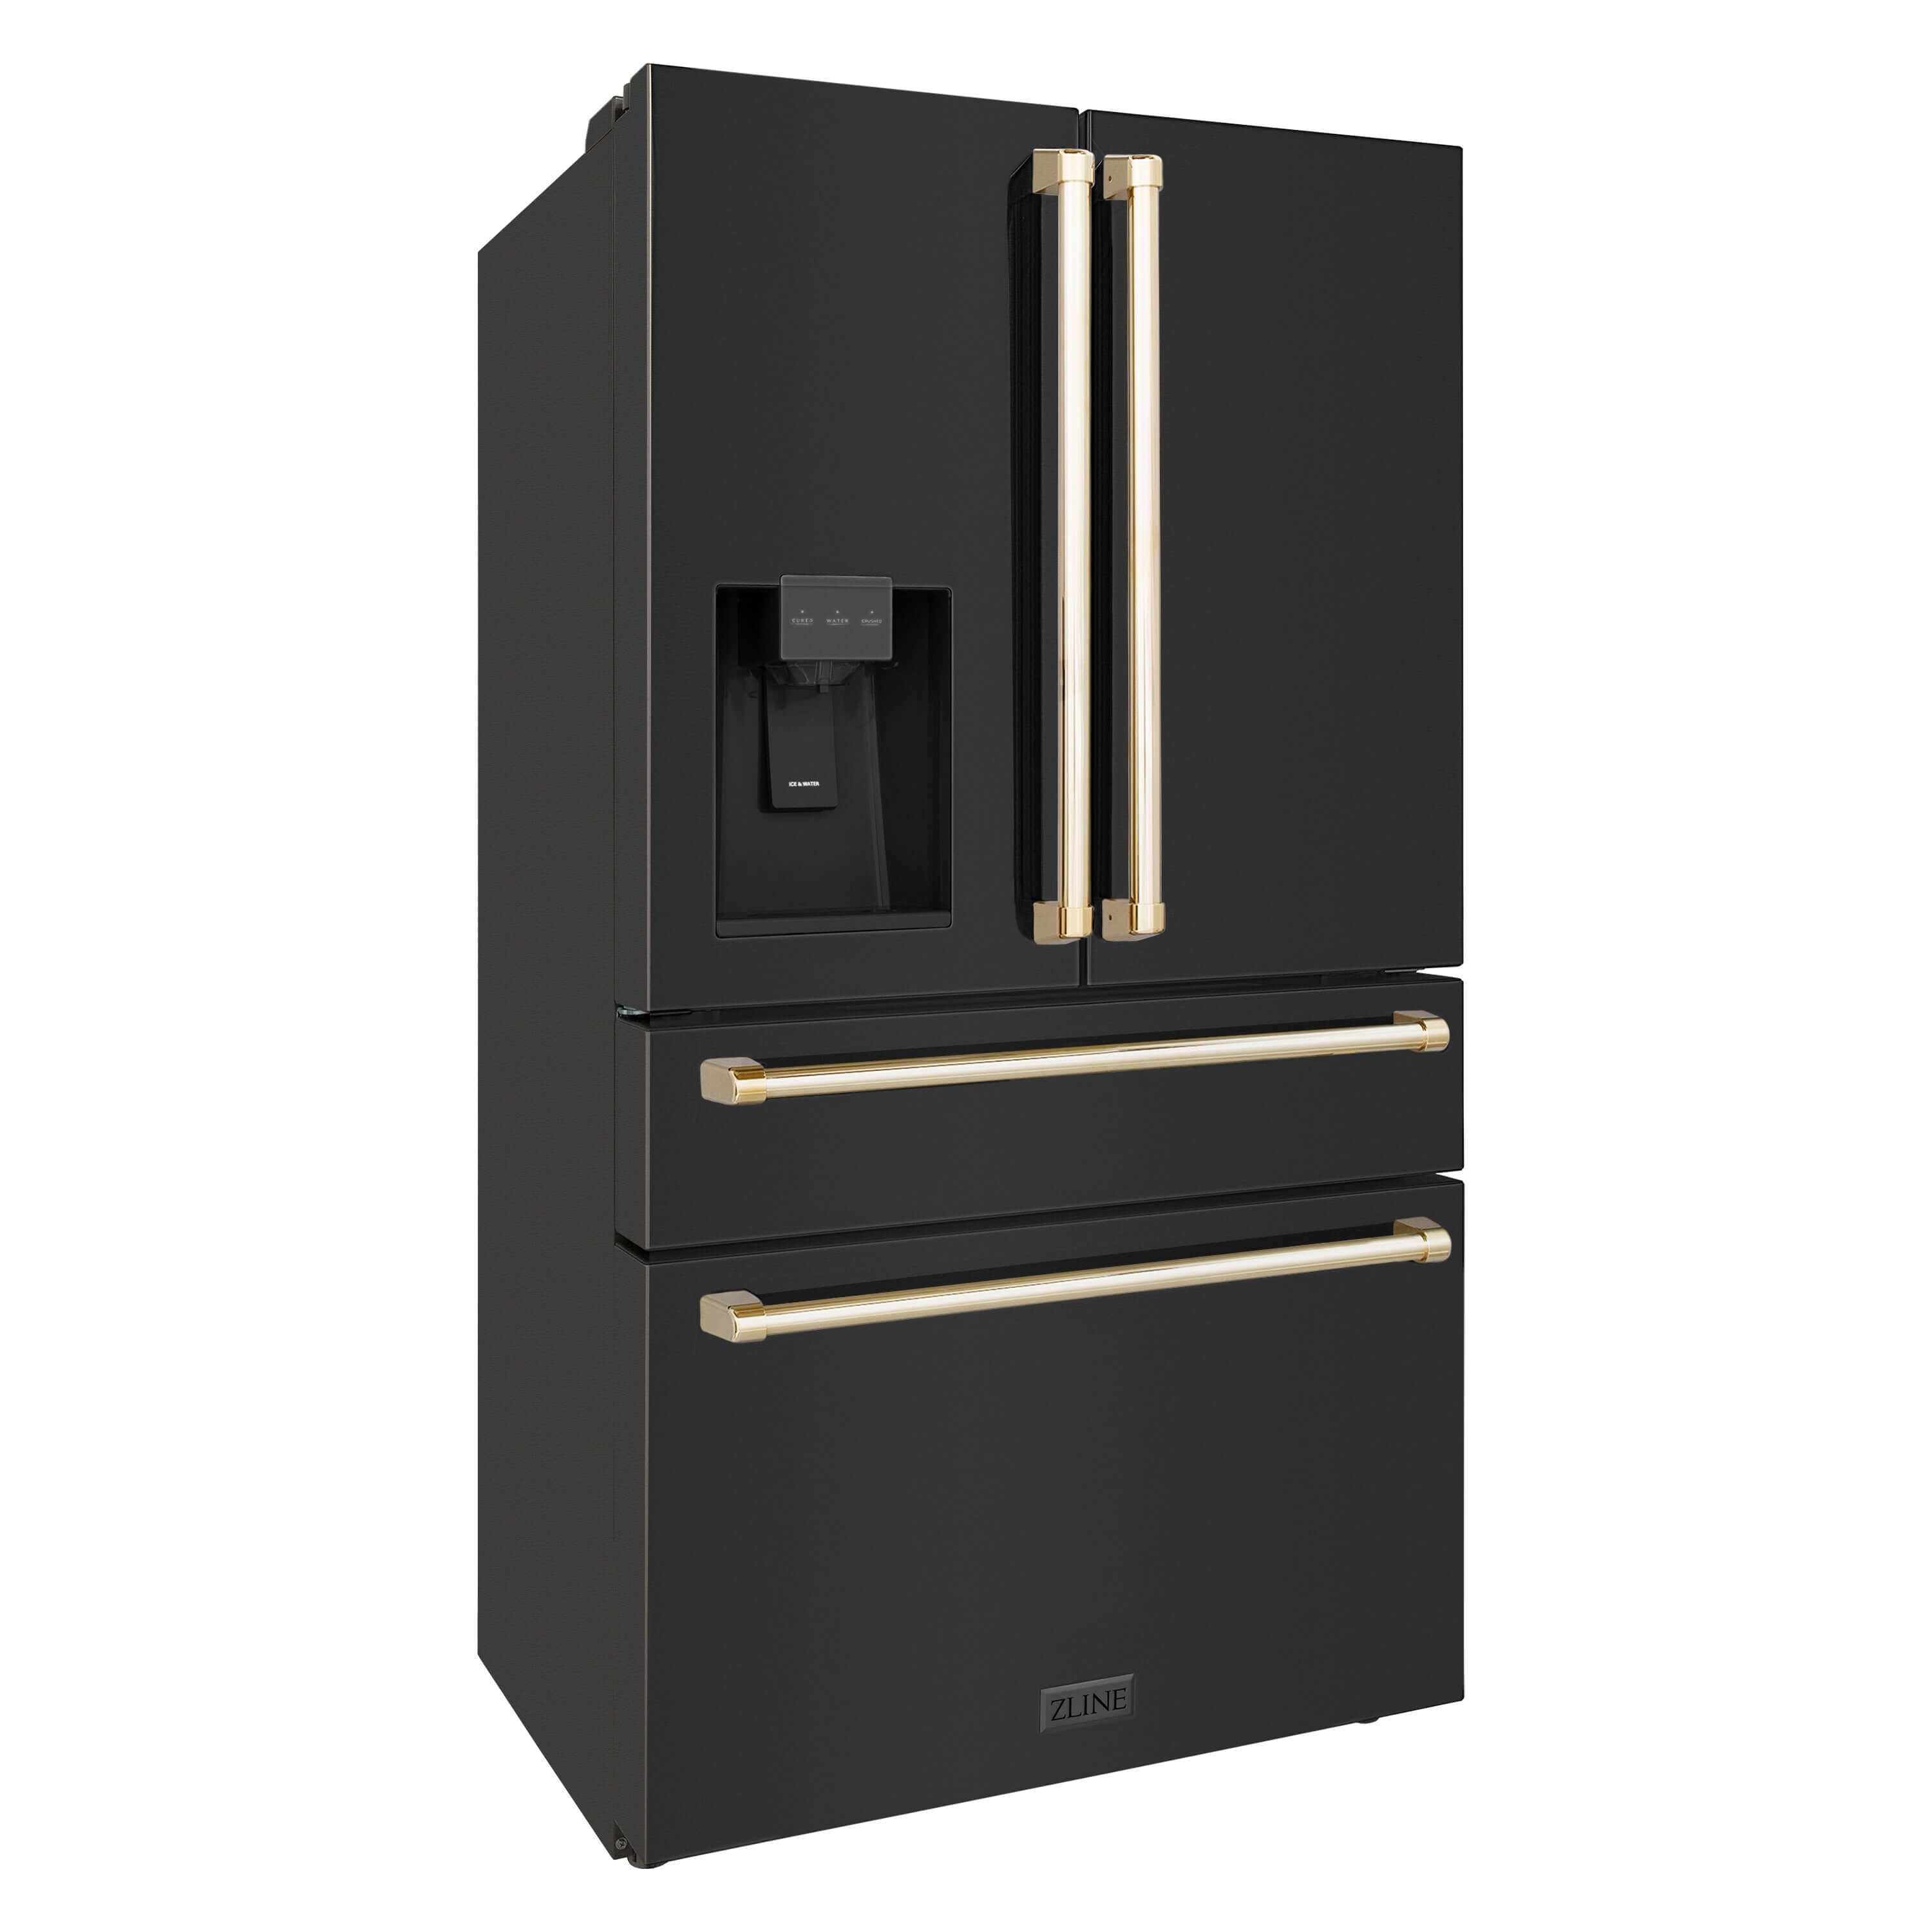 ZLINE 36 in. Black Stainless Steel French Door Refrigerator with Polished Gold handles and External Water and Ice Dispenser Side View.